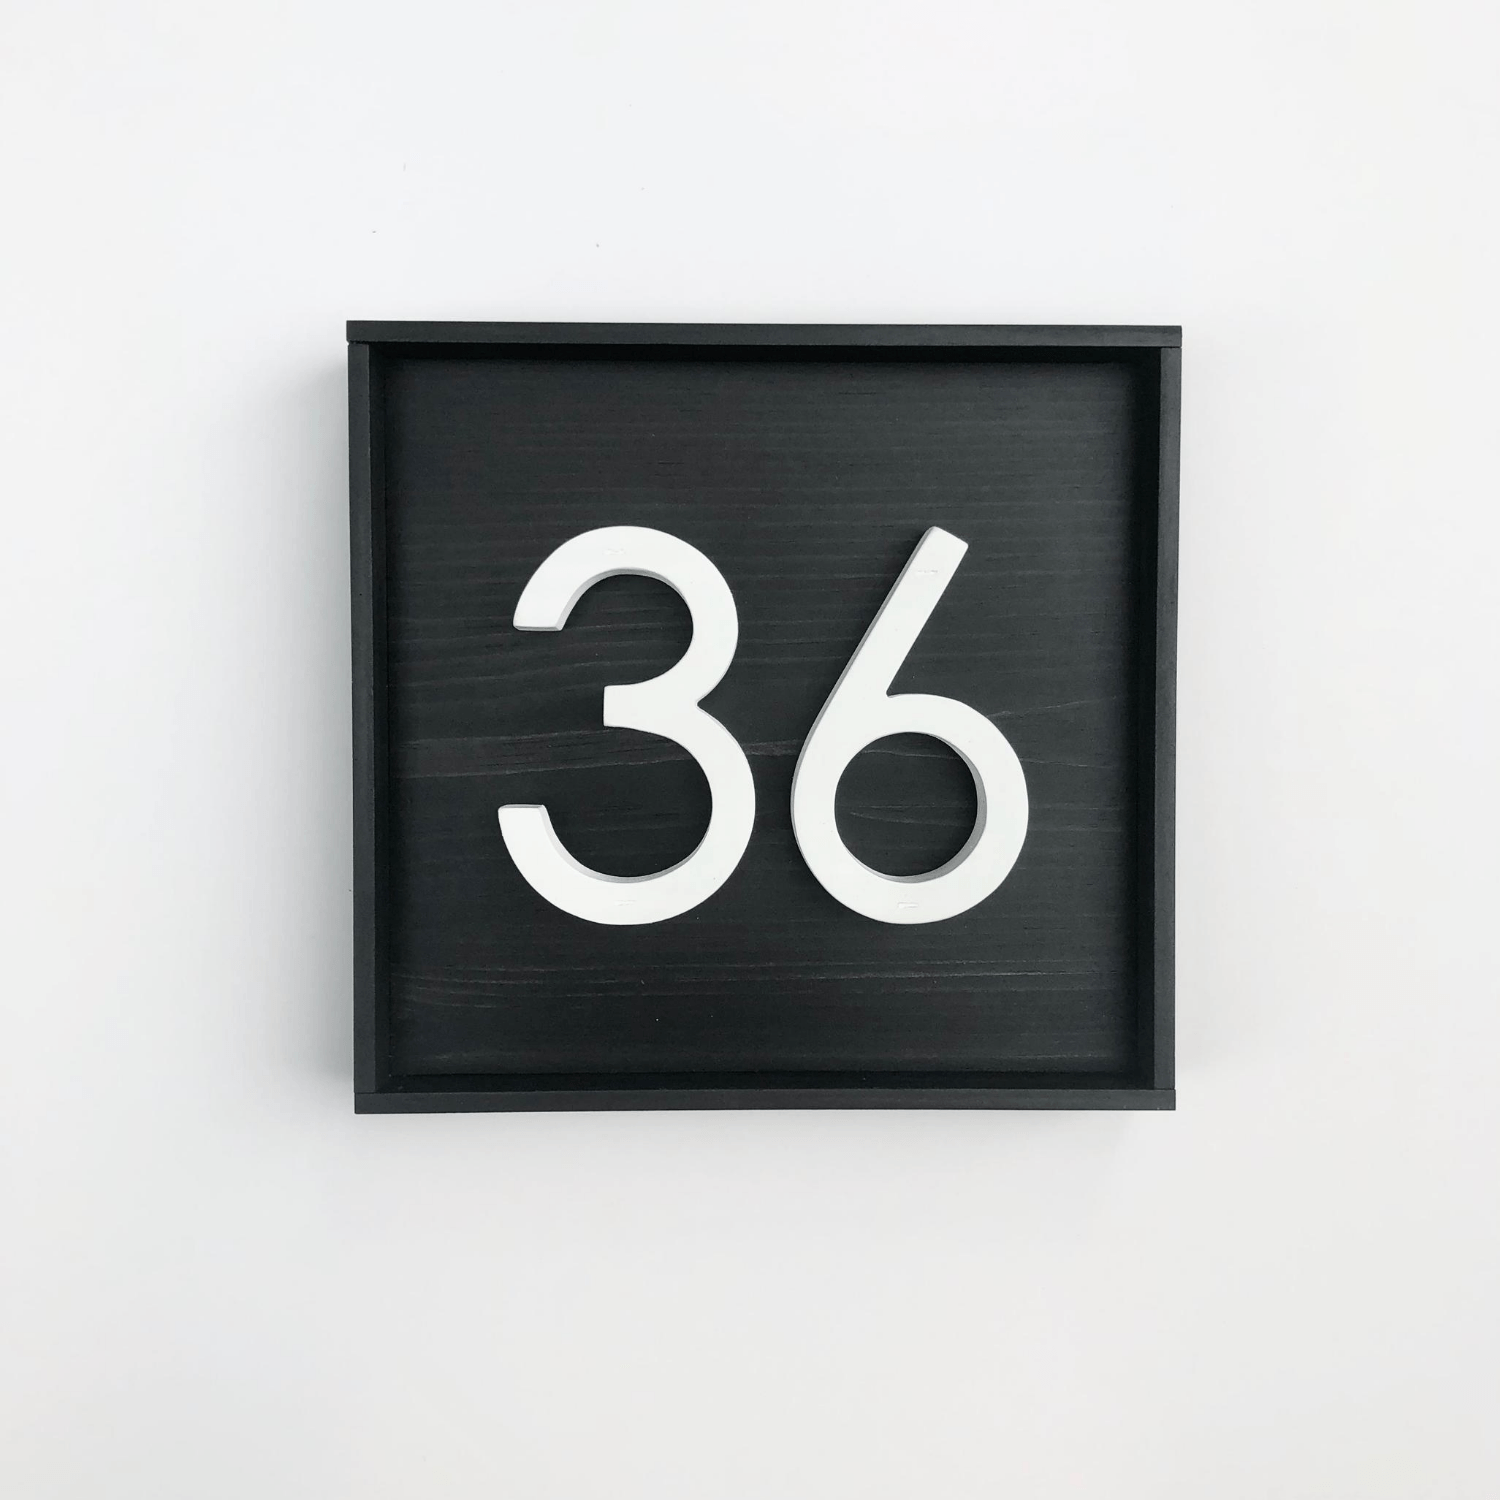 Square wood address sign with black base with 2 modern white PVC numbers